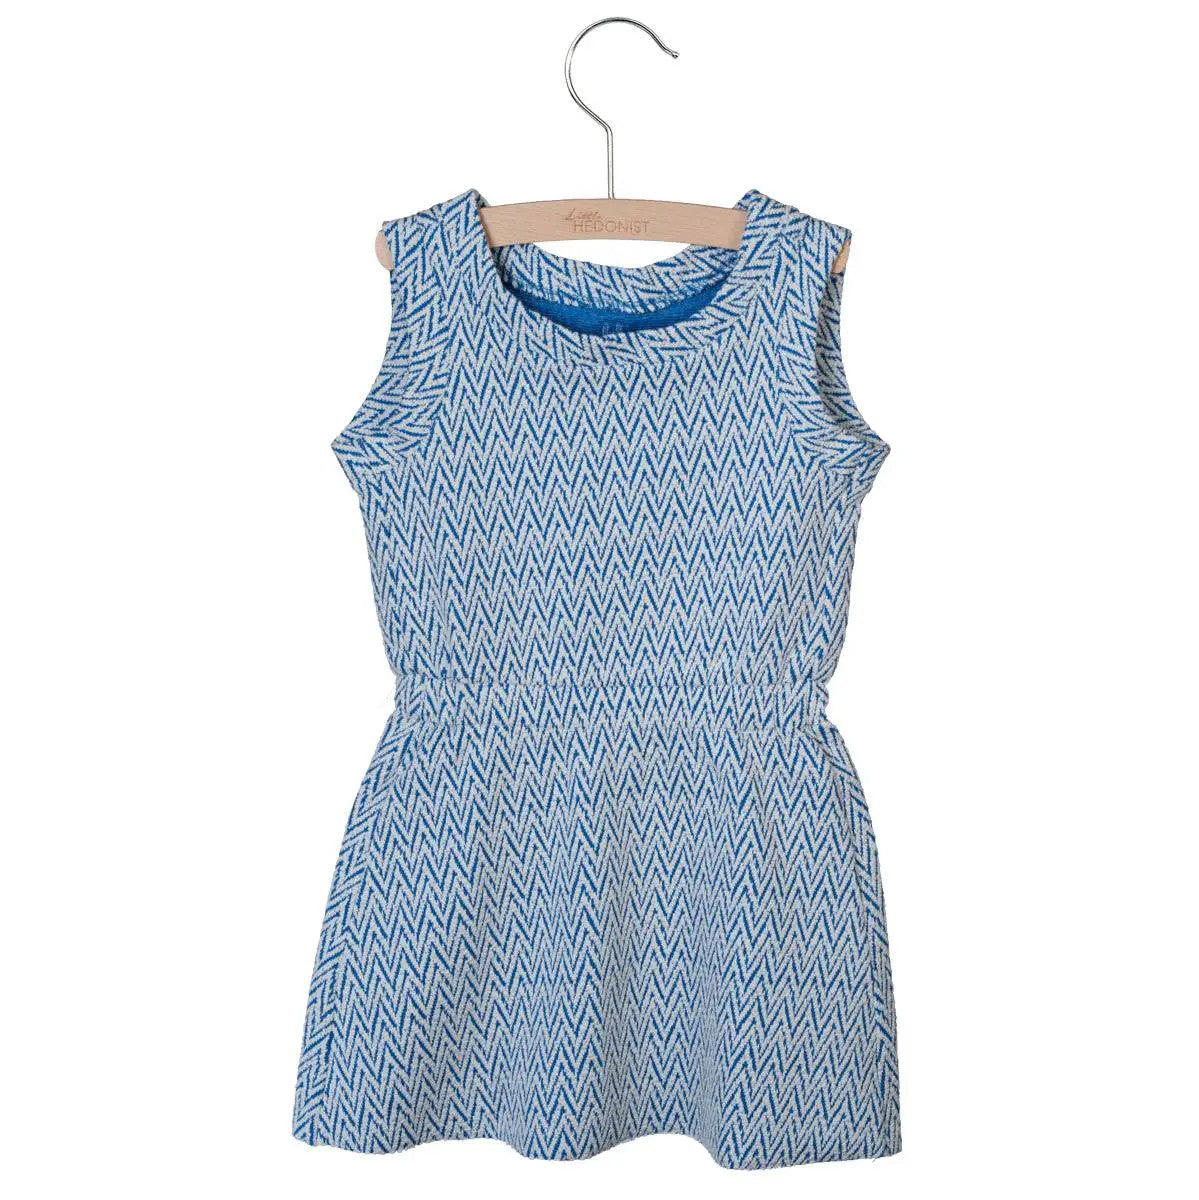 Little Hedonist blue sleeveless dress in organic cotton terry cloth. For the little girls who like to look fancy, but stay comfy